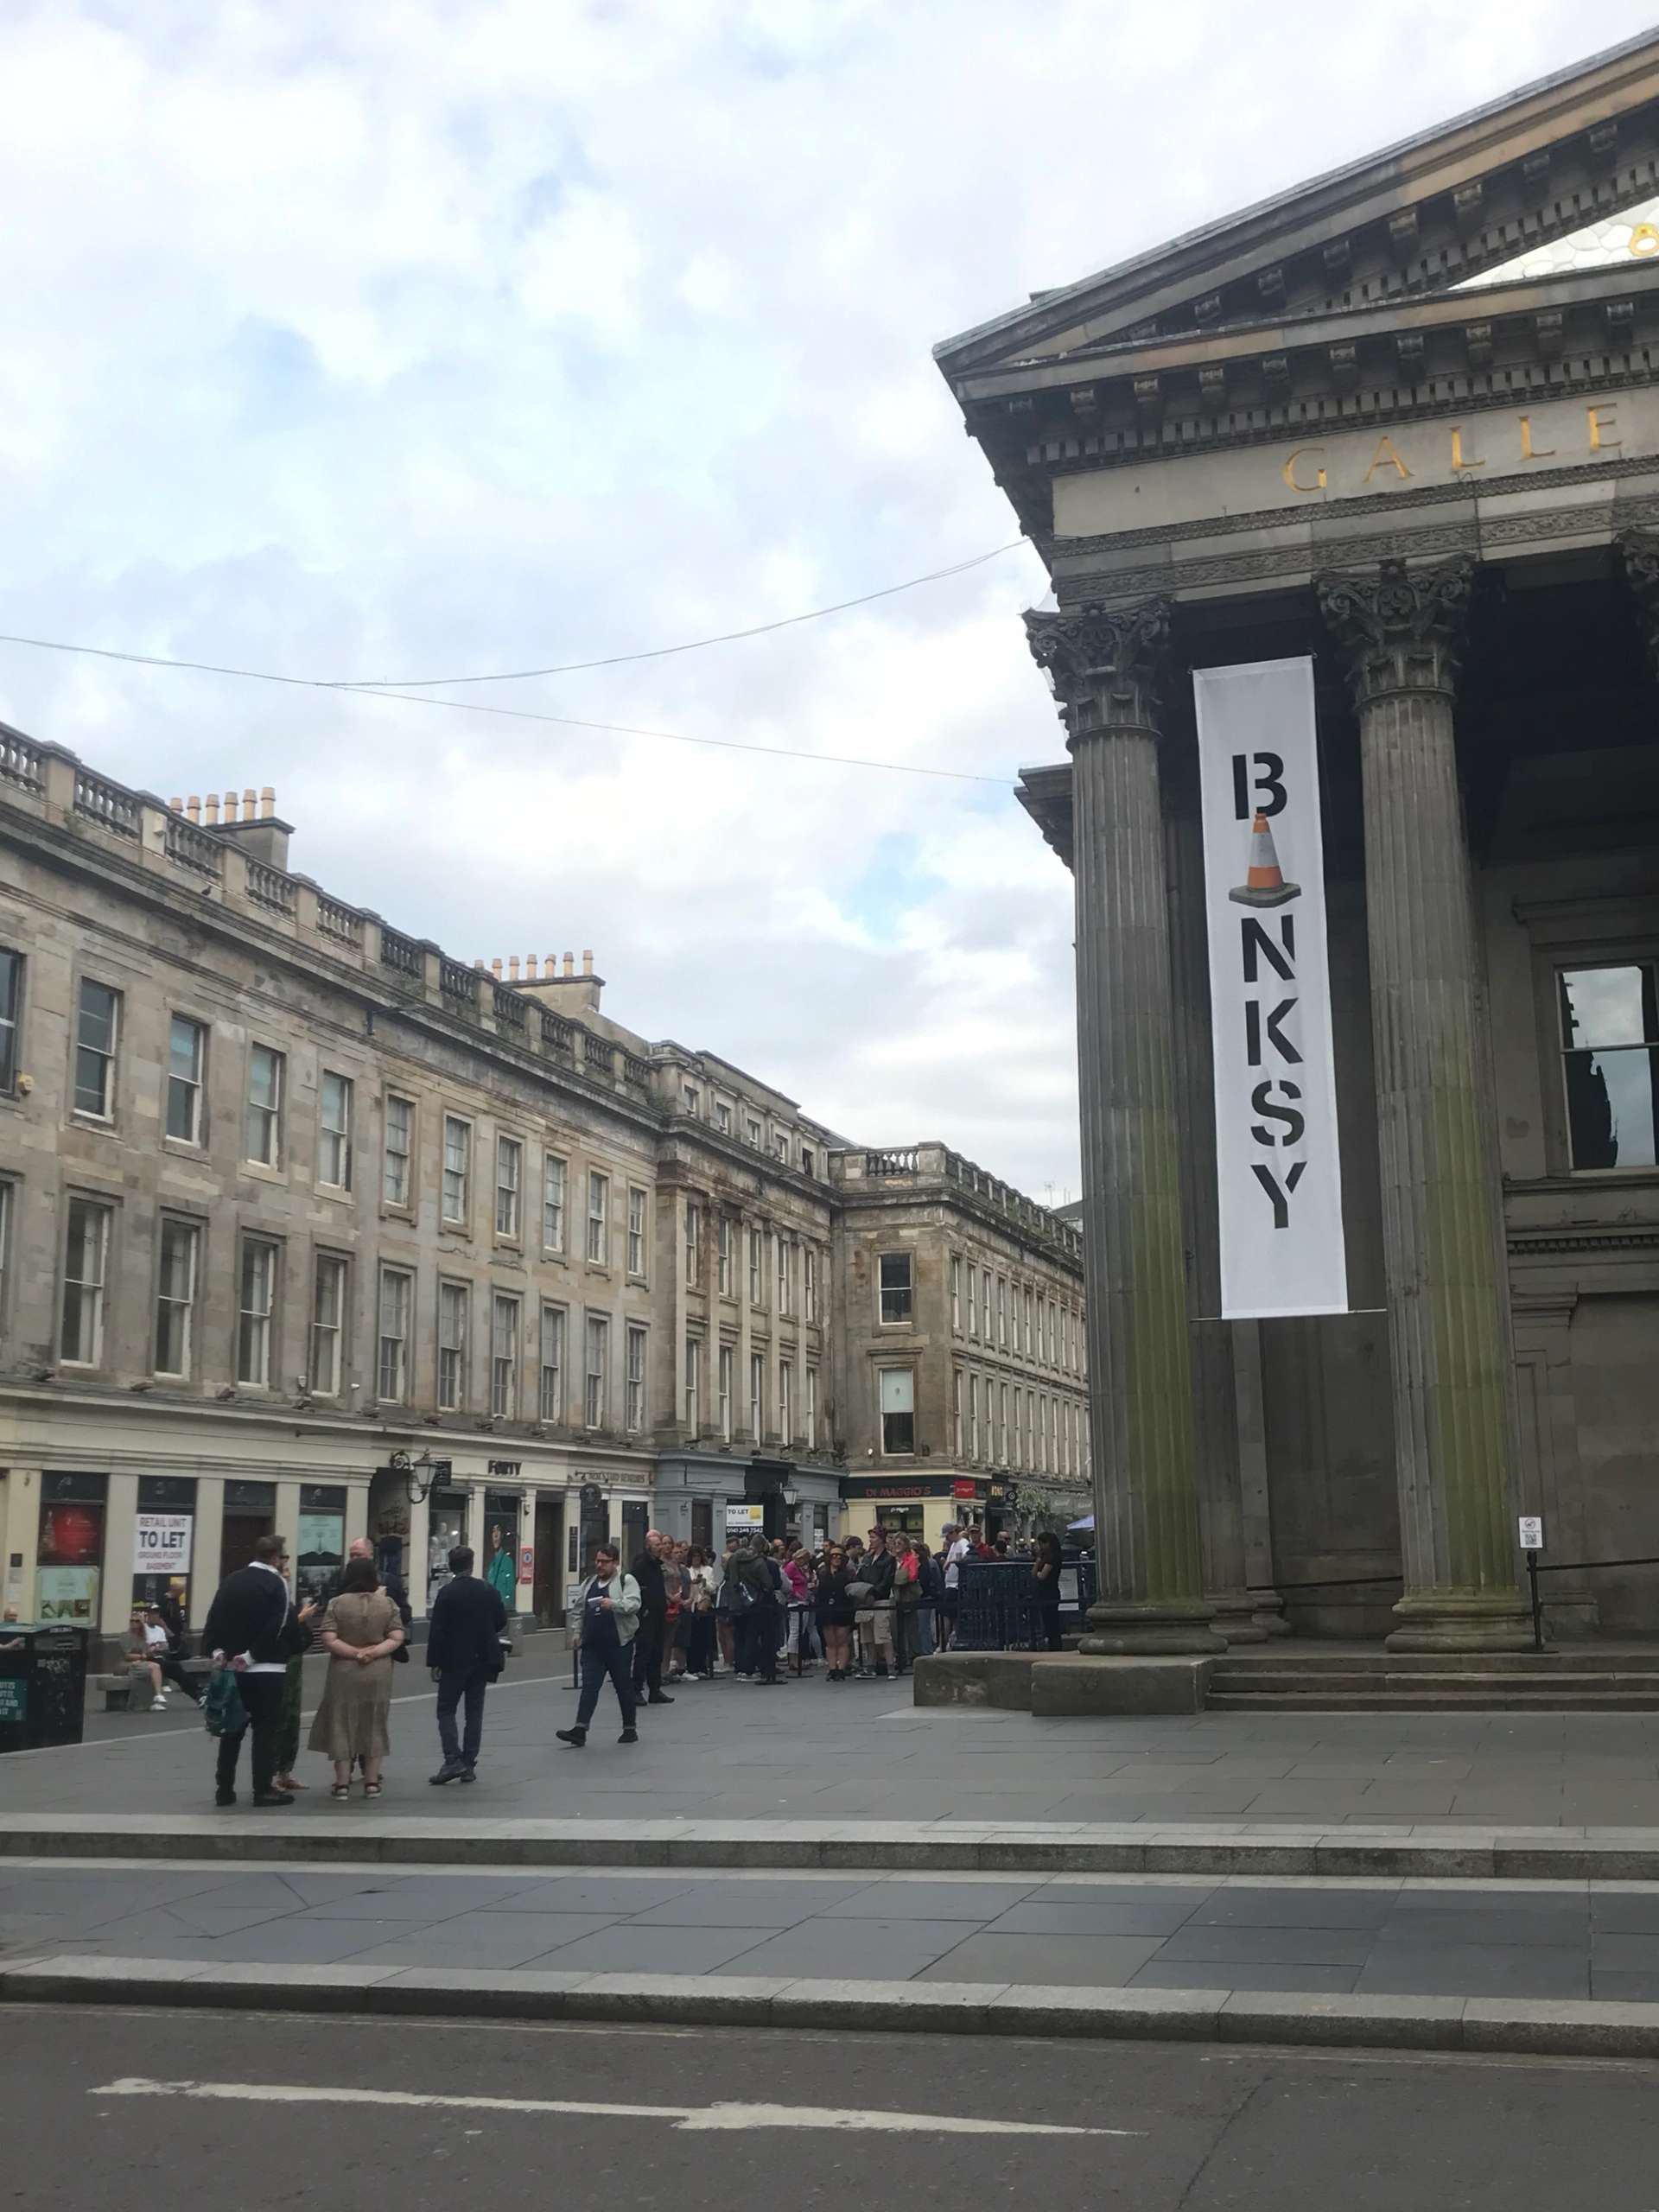 A photograph of the queue outside Banksy's CUT & RUN Exhibition at the GoMA.